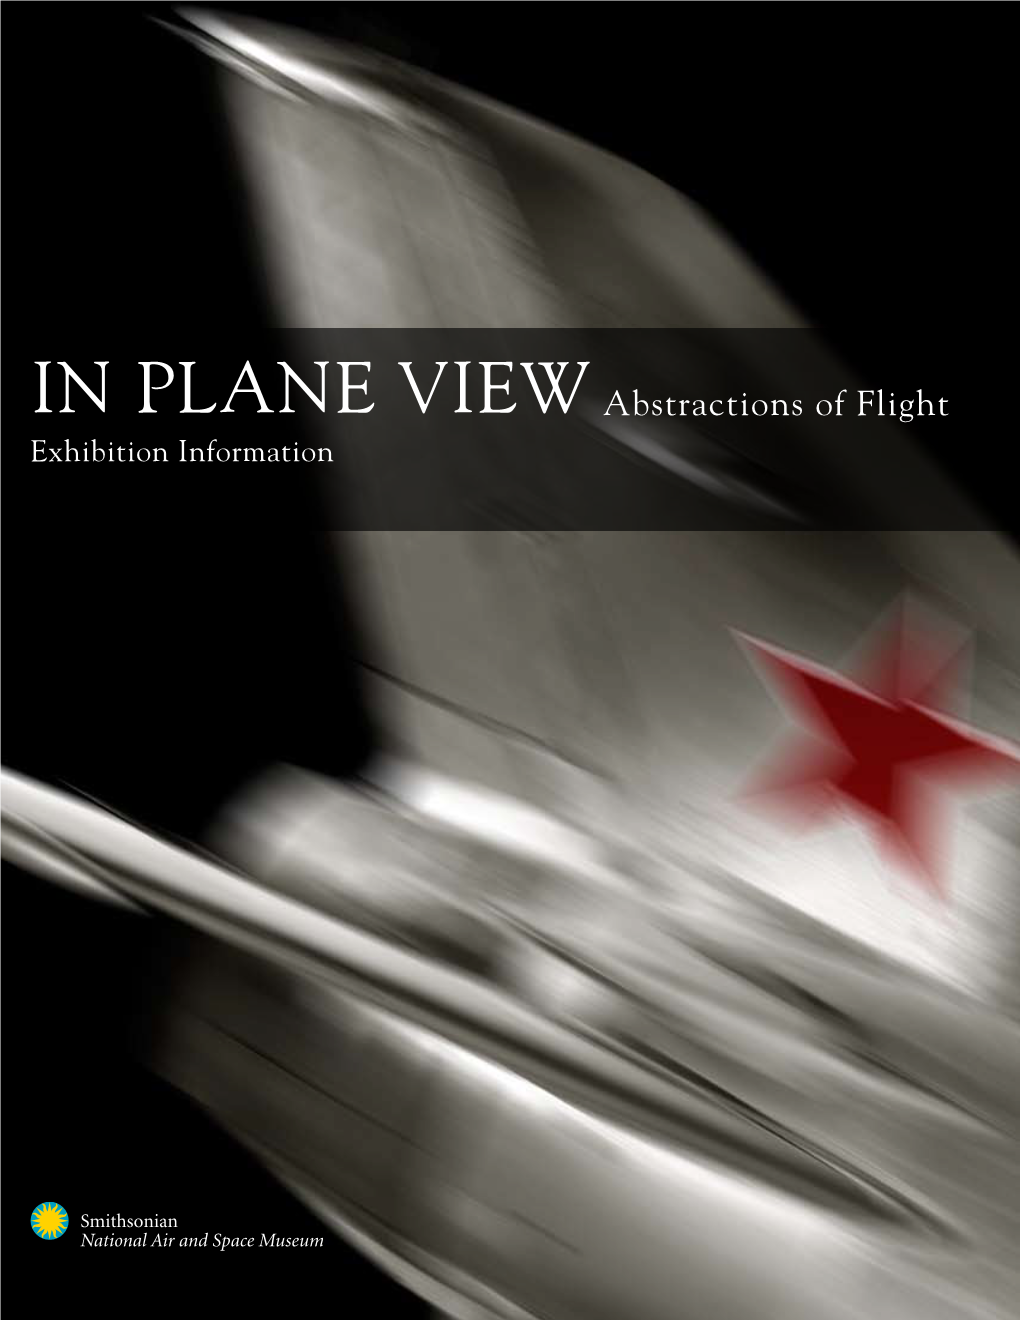 IN PLANE VIEW Abstractions of Flight Exhibition Information “Painting Has Come to an End